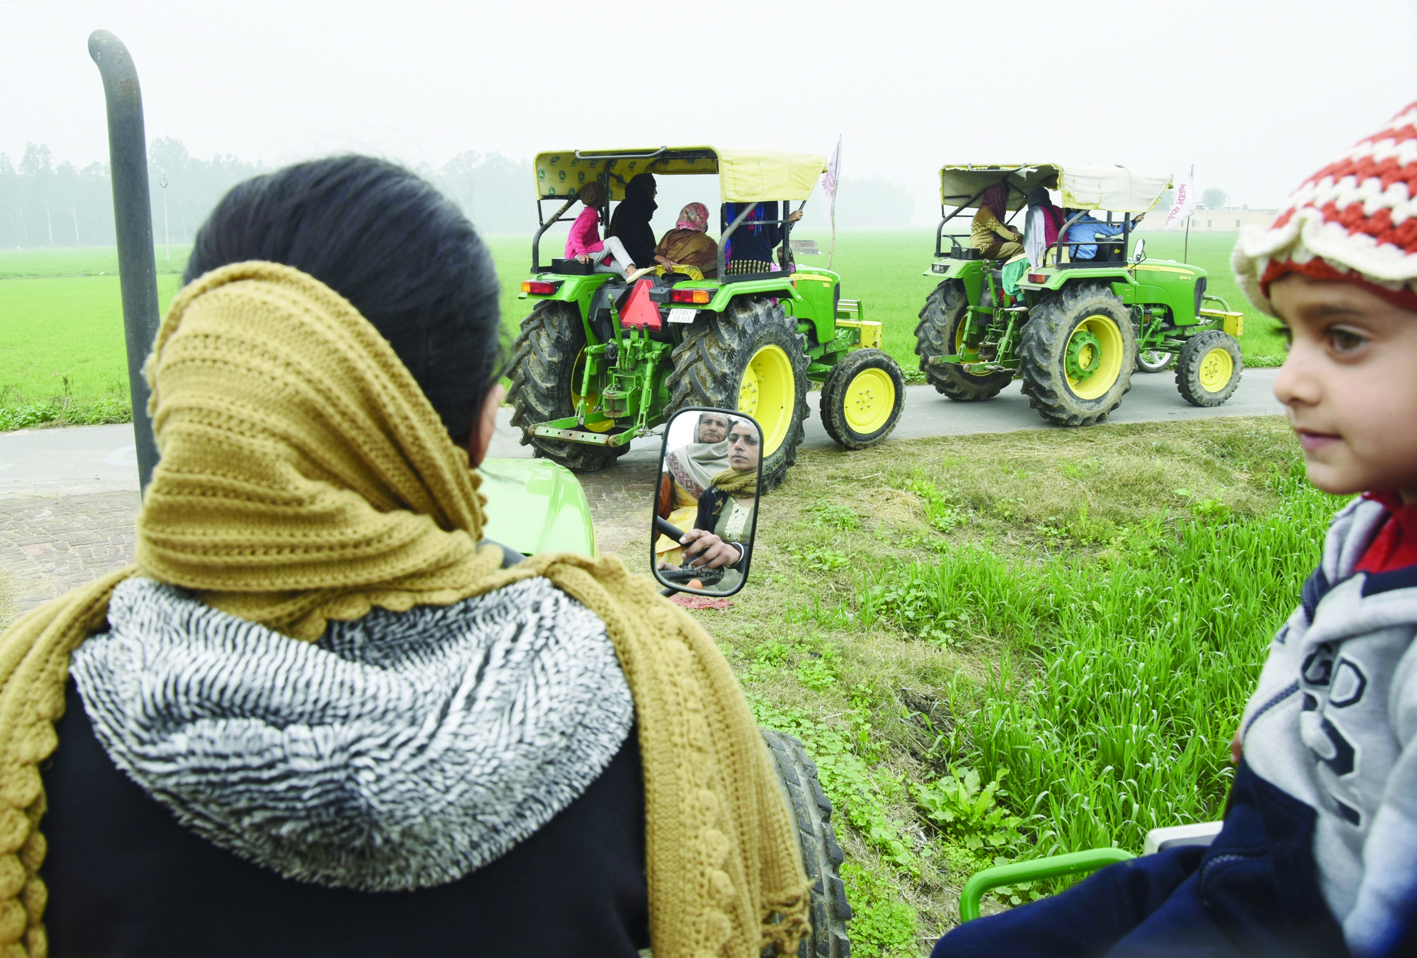 AMRITSAR: Wives and daughters of farmers practice driving tractors to take part in Women Tractor Rally on the occasion of Republic Day in India's capital Delhi to protest against the central government's recent agricultural reforms, on the outskirts of Amritsar. - AFPn